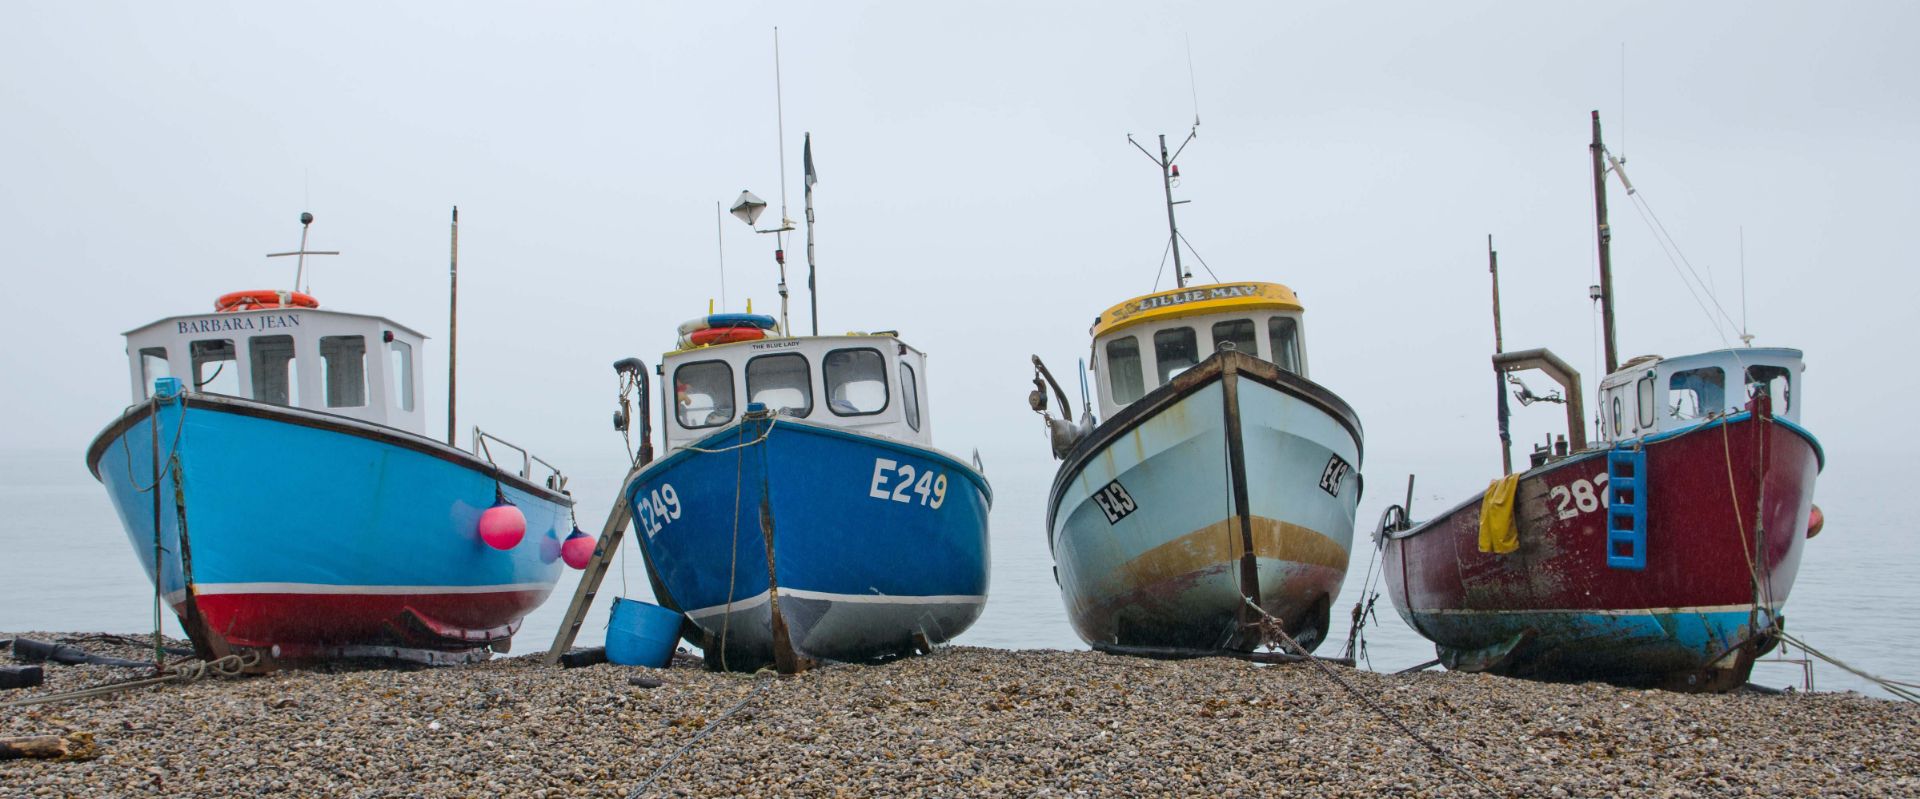 Fishing boats at Beer in Devon